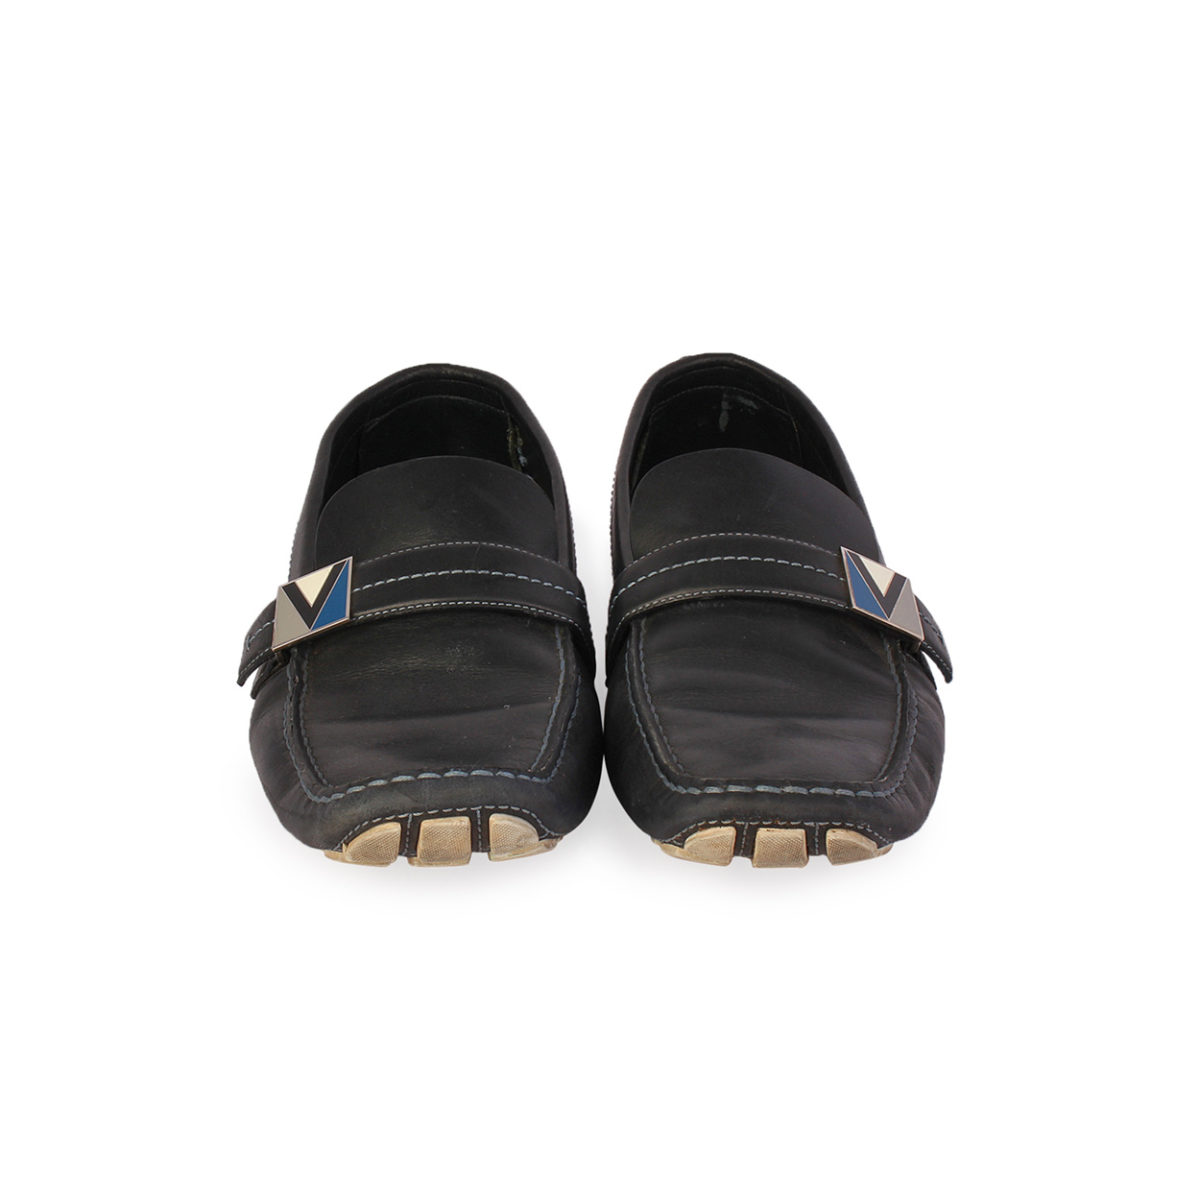 LOUIS VUITTON Americas Cup Driving Loafers - S: 44.5 (10) | Luxity